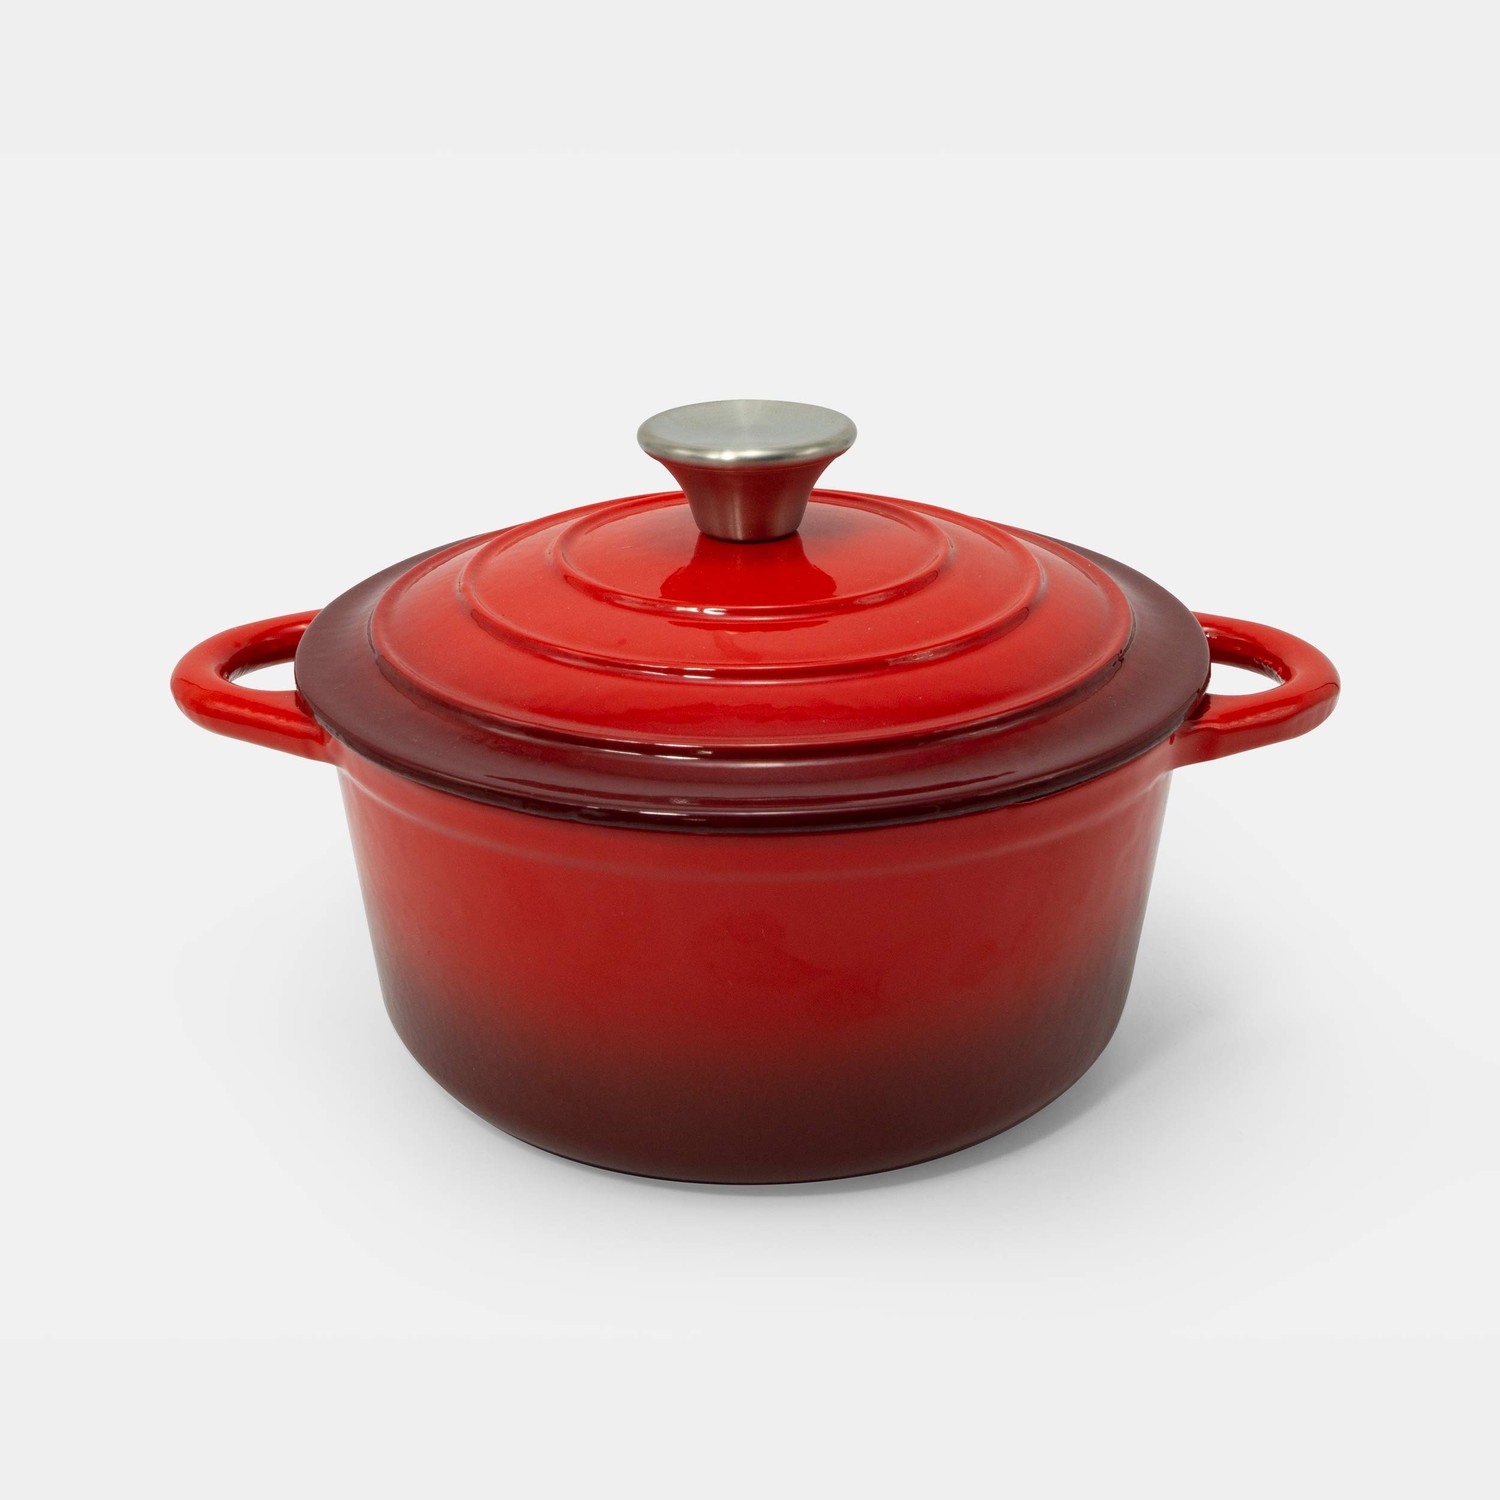 EXCELSTEEL 443 2.8QT CASSEROLE PAN WITH RED ENAMEL COATING